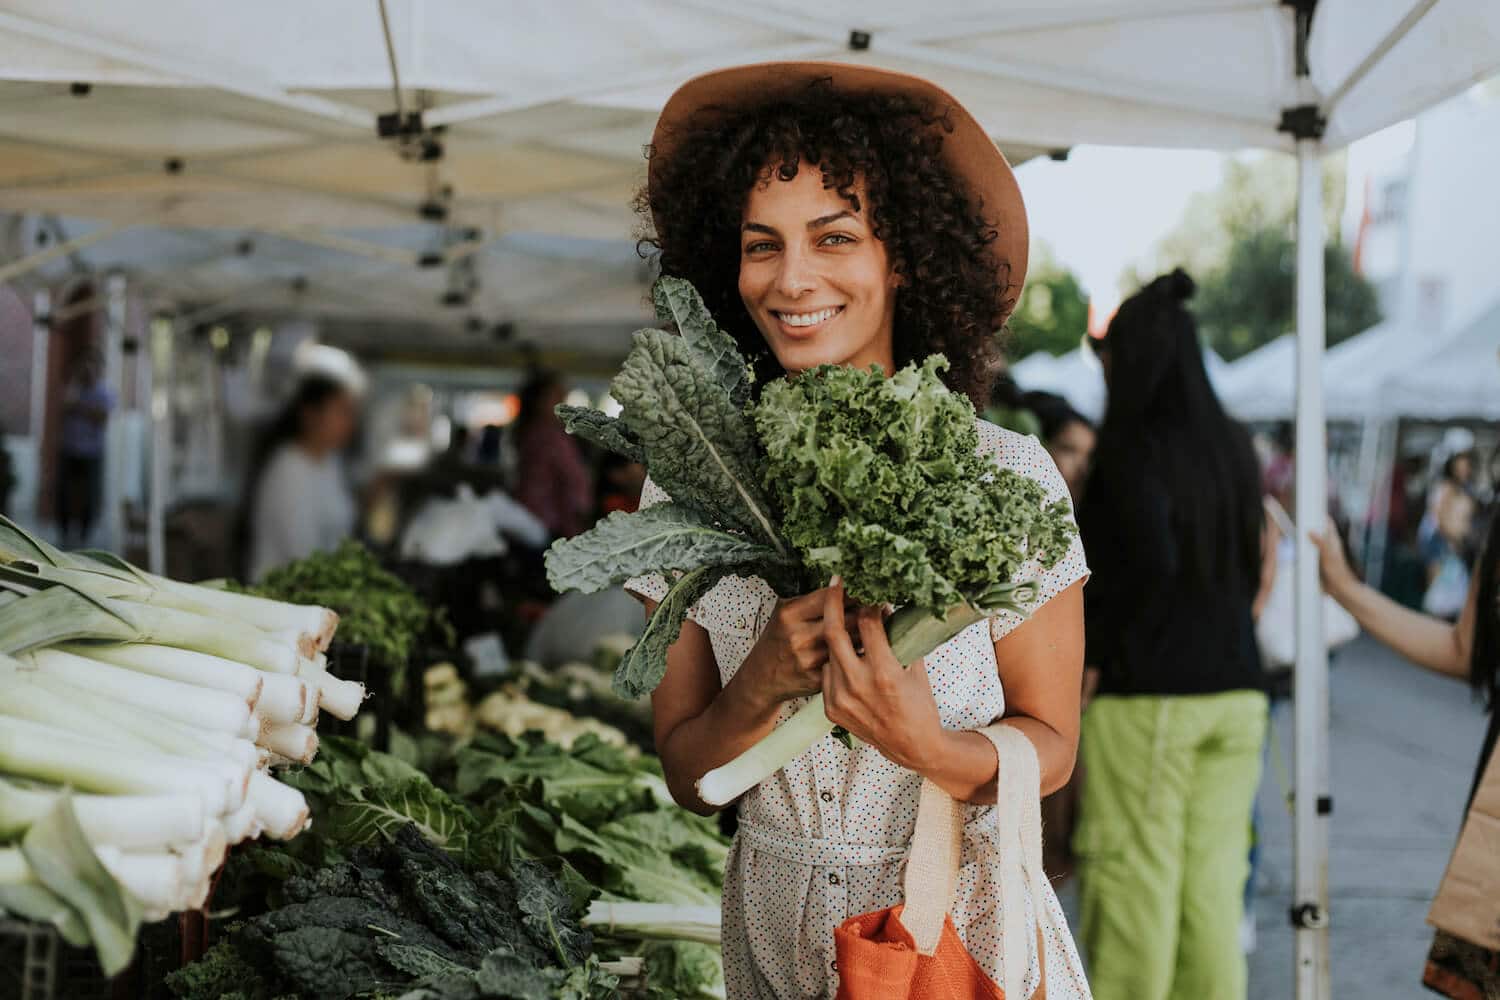 A woman holding produce at Piedmont Park's Green Market